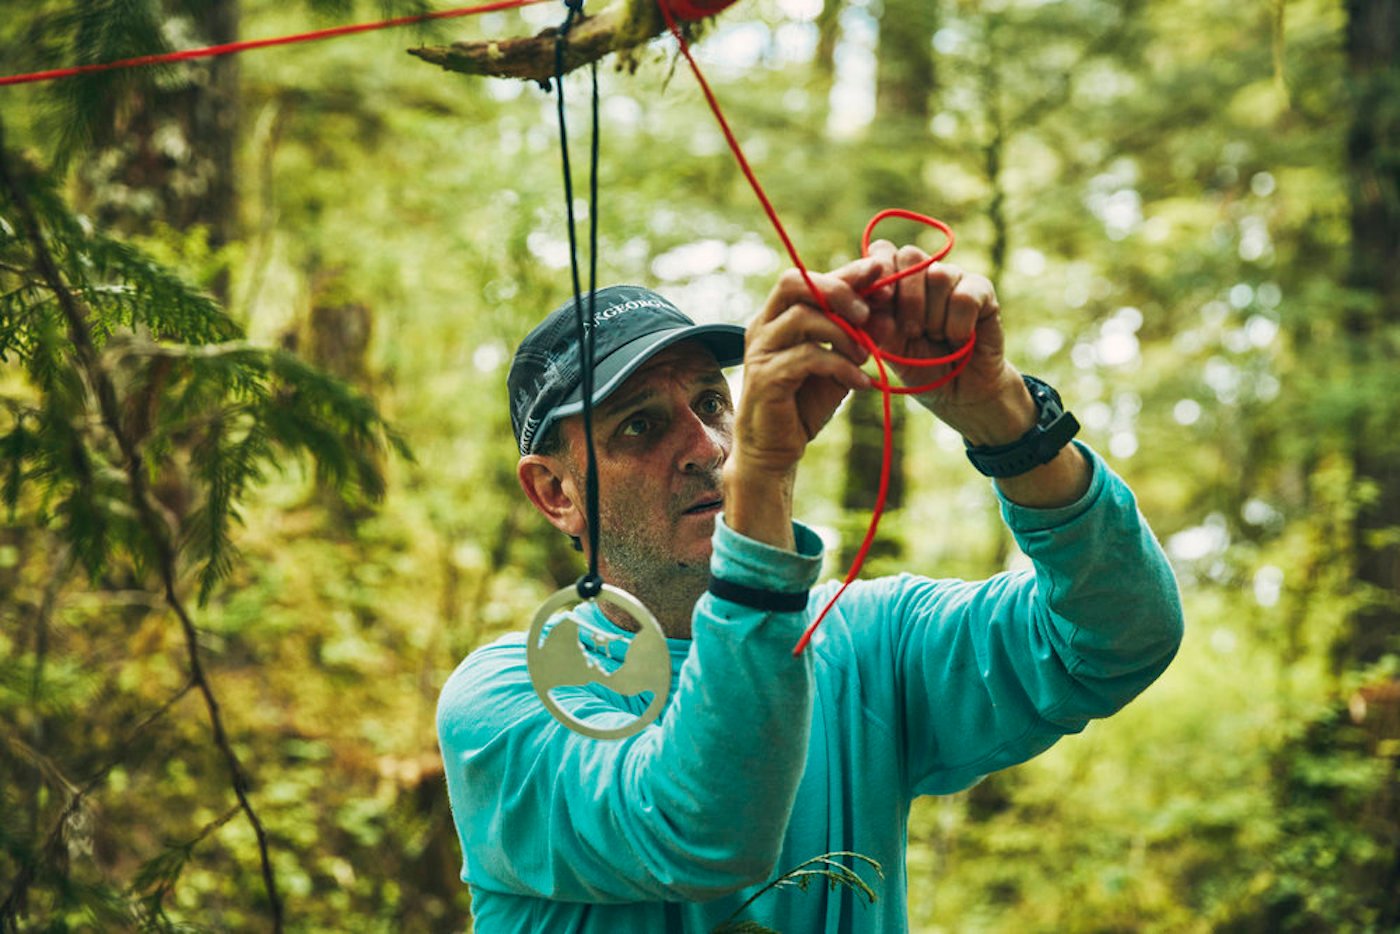 Jeff Leininger ties a red ribbon a tree branch on 'Race to Survive: Alaska'.